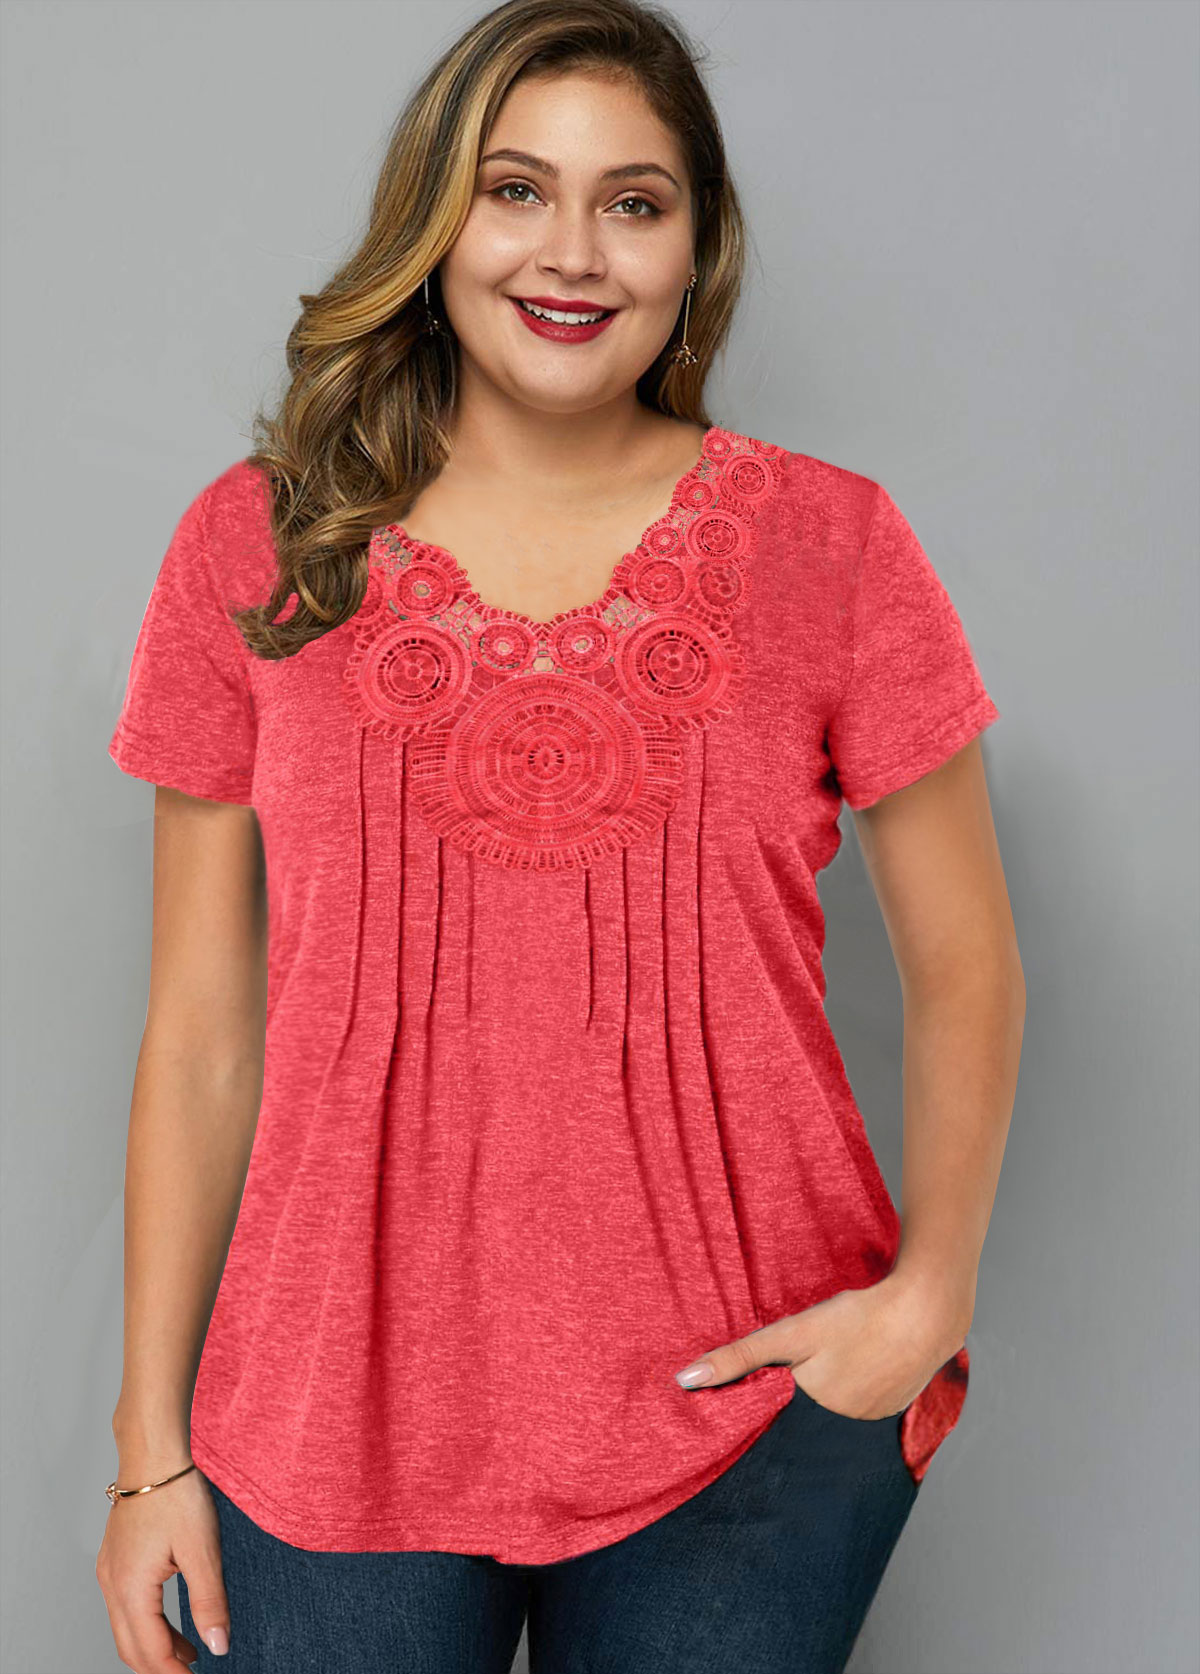 Crinkle Chest Short Sleeve Coral Red T Shirt